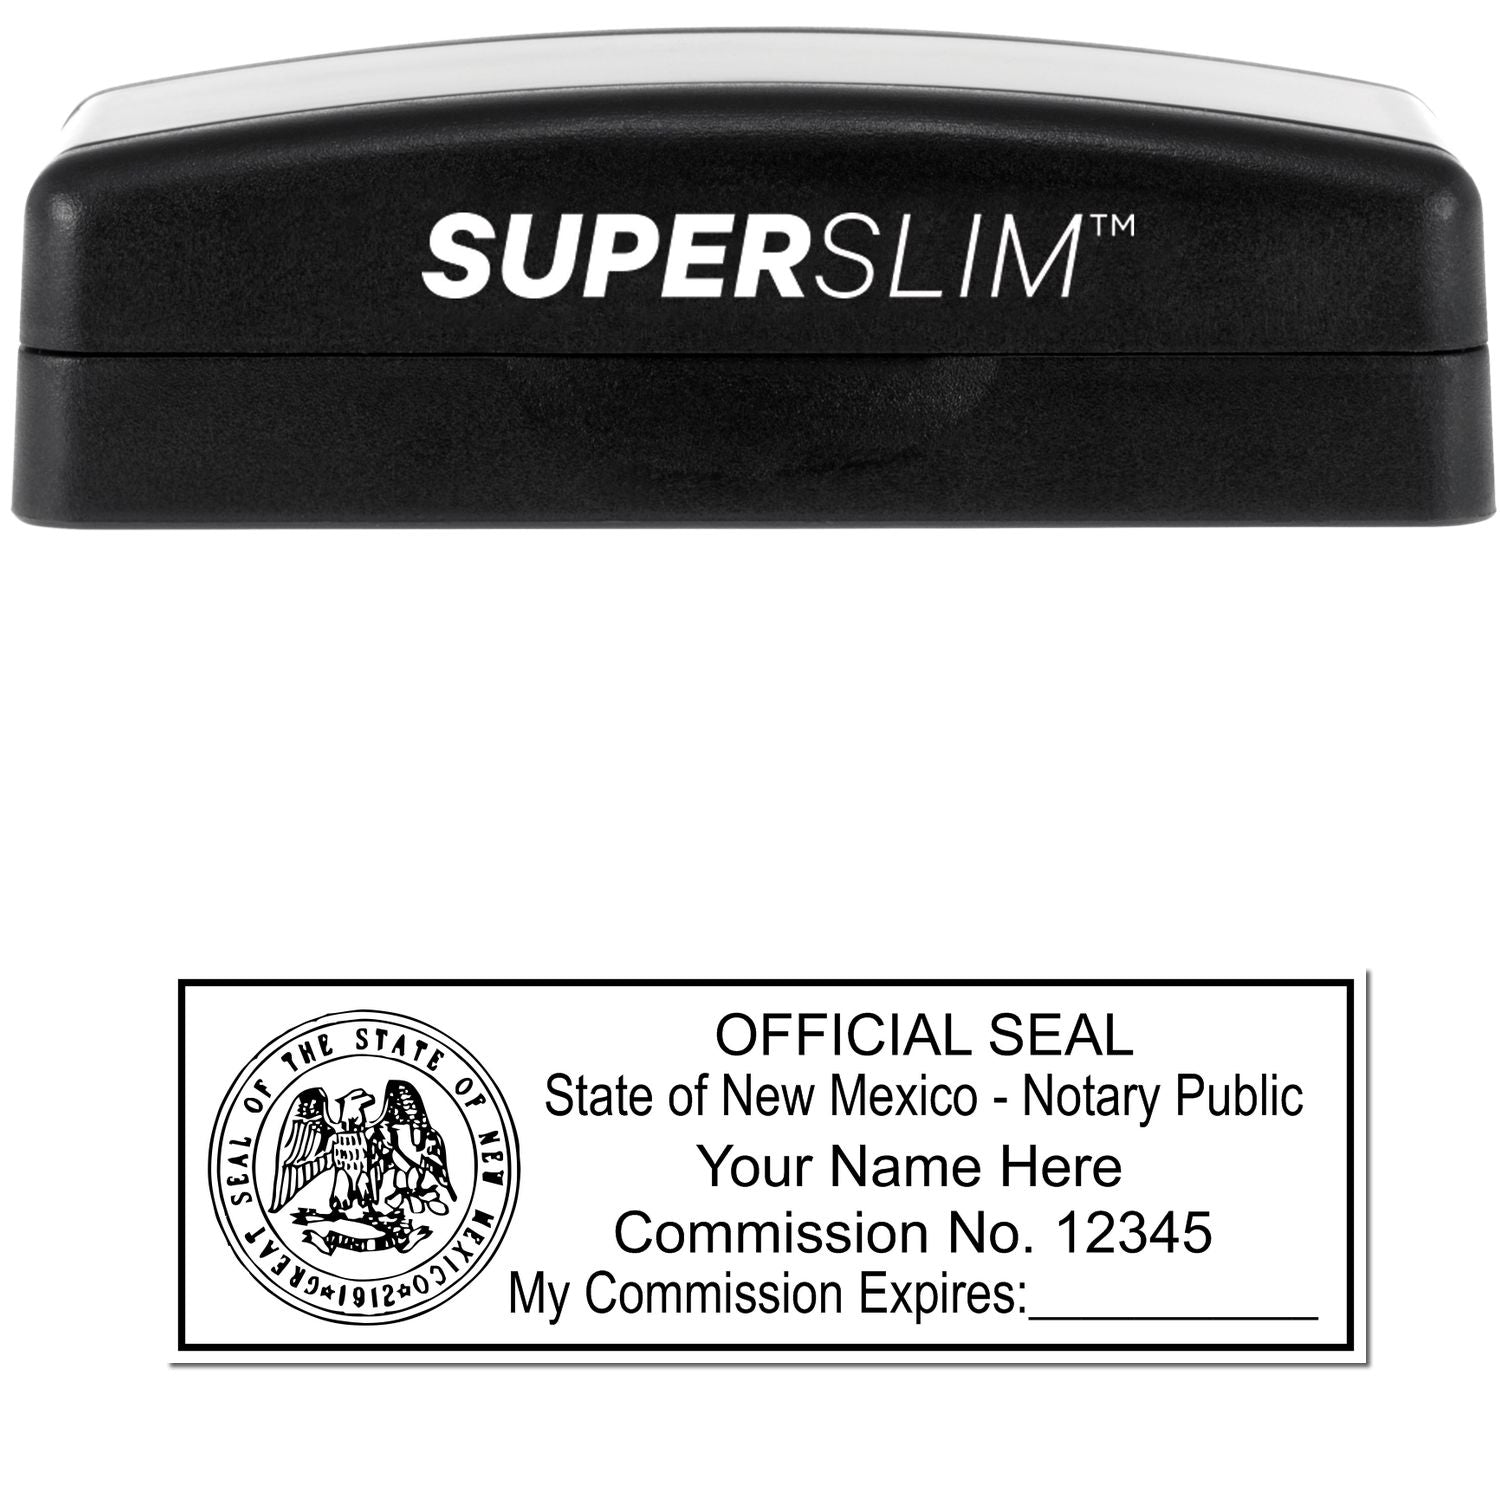 The main image for the Super Slim New Mexico Notary Public Stamp depicting a sample of the imprint and electronic files